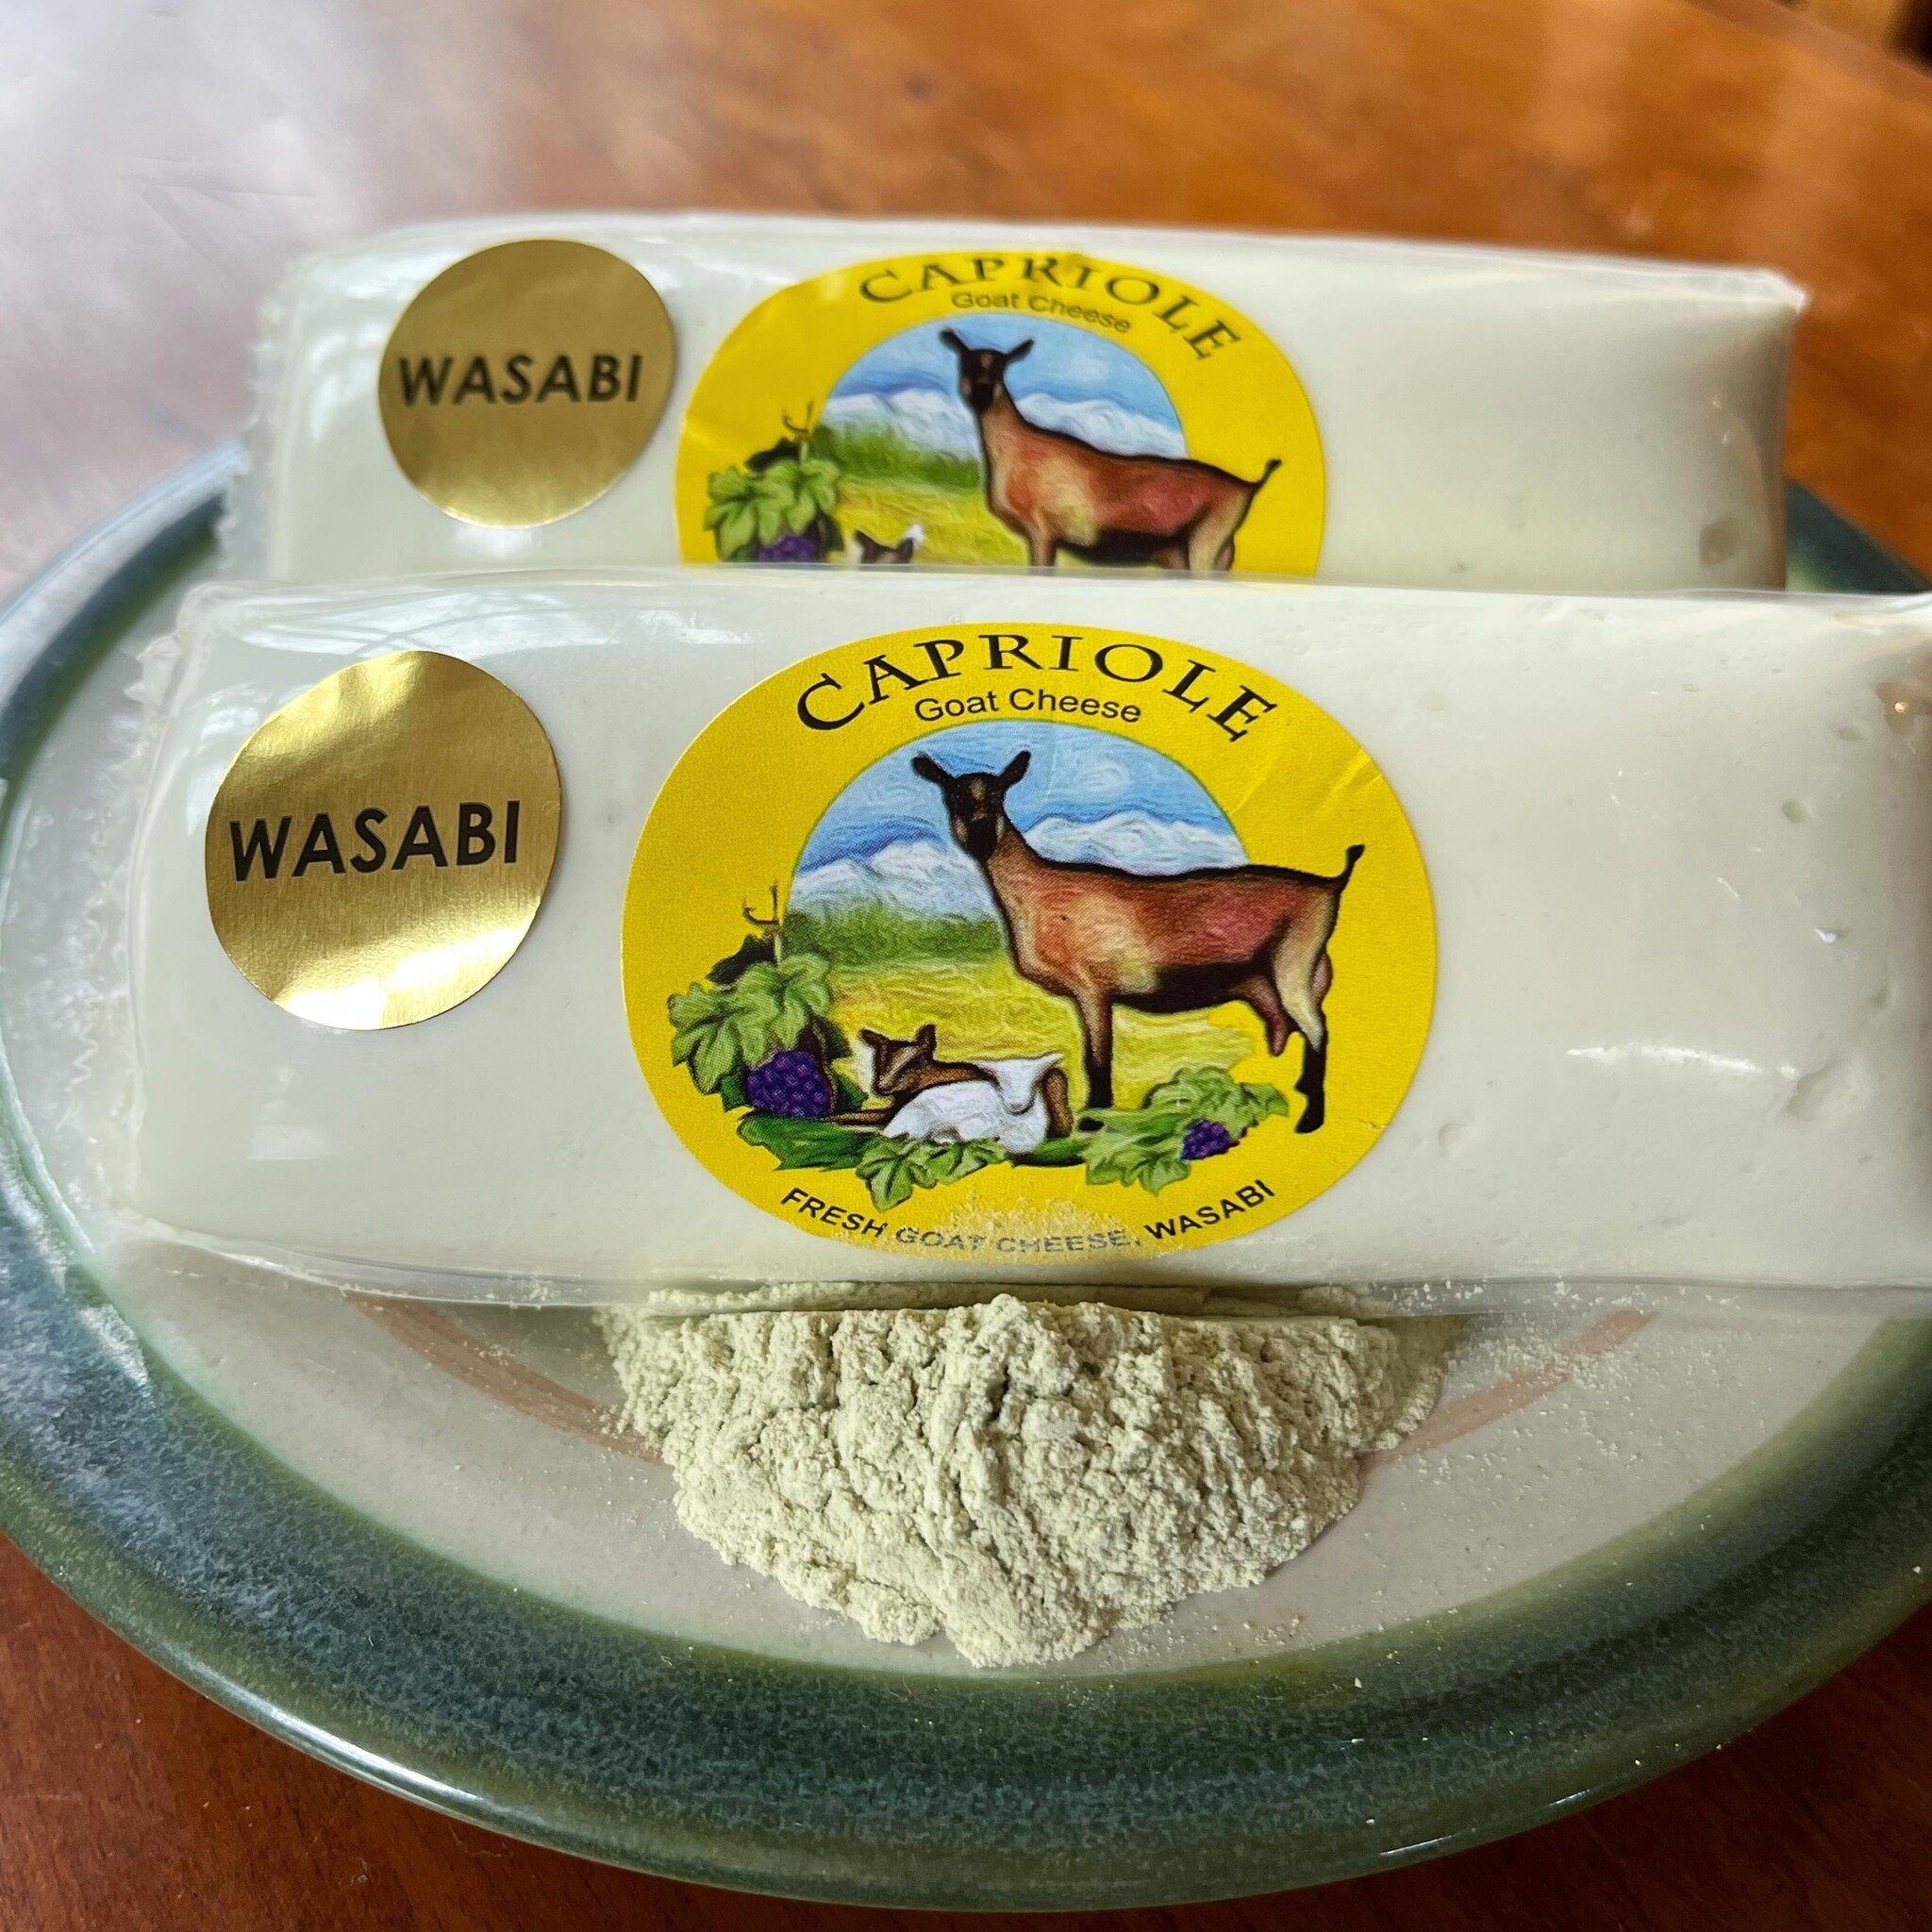 Wasabi is back by popular demand! This cheese is our fresh ch&egrave;vre&rsquo;s spicier counterpart with just the right amount of zippiness. Perfect crumbled on a spring salad, or just poke a hole in the log and squeeze it straight into your mouth l